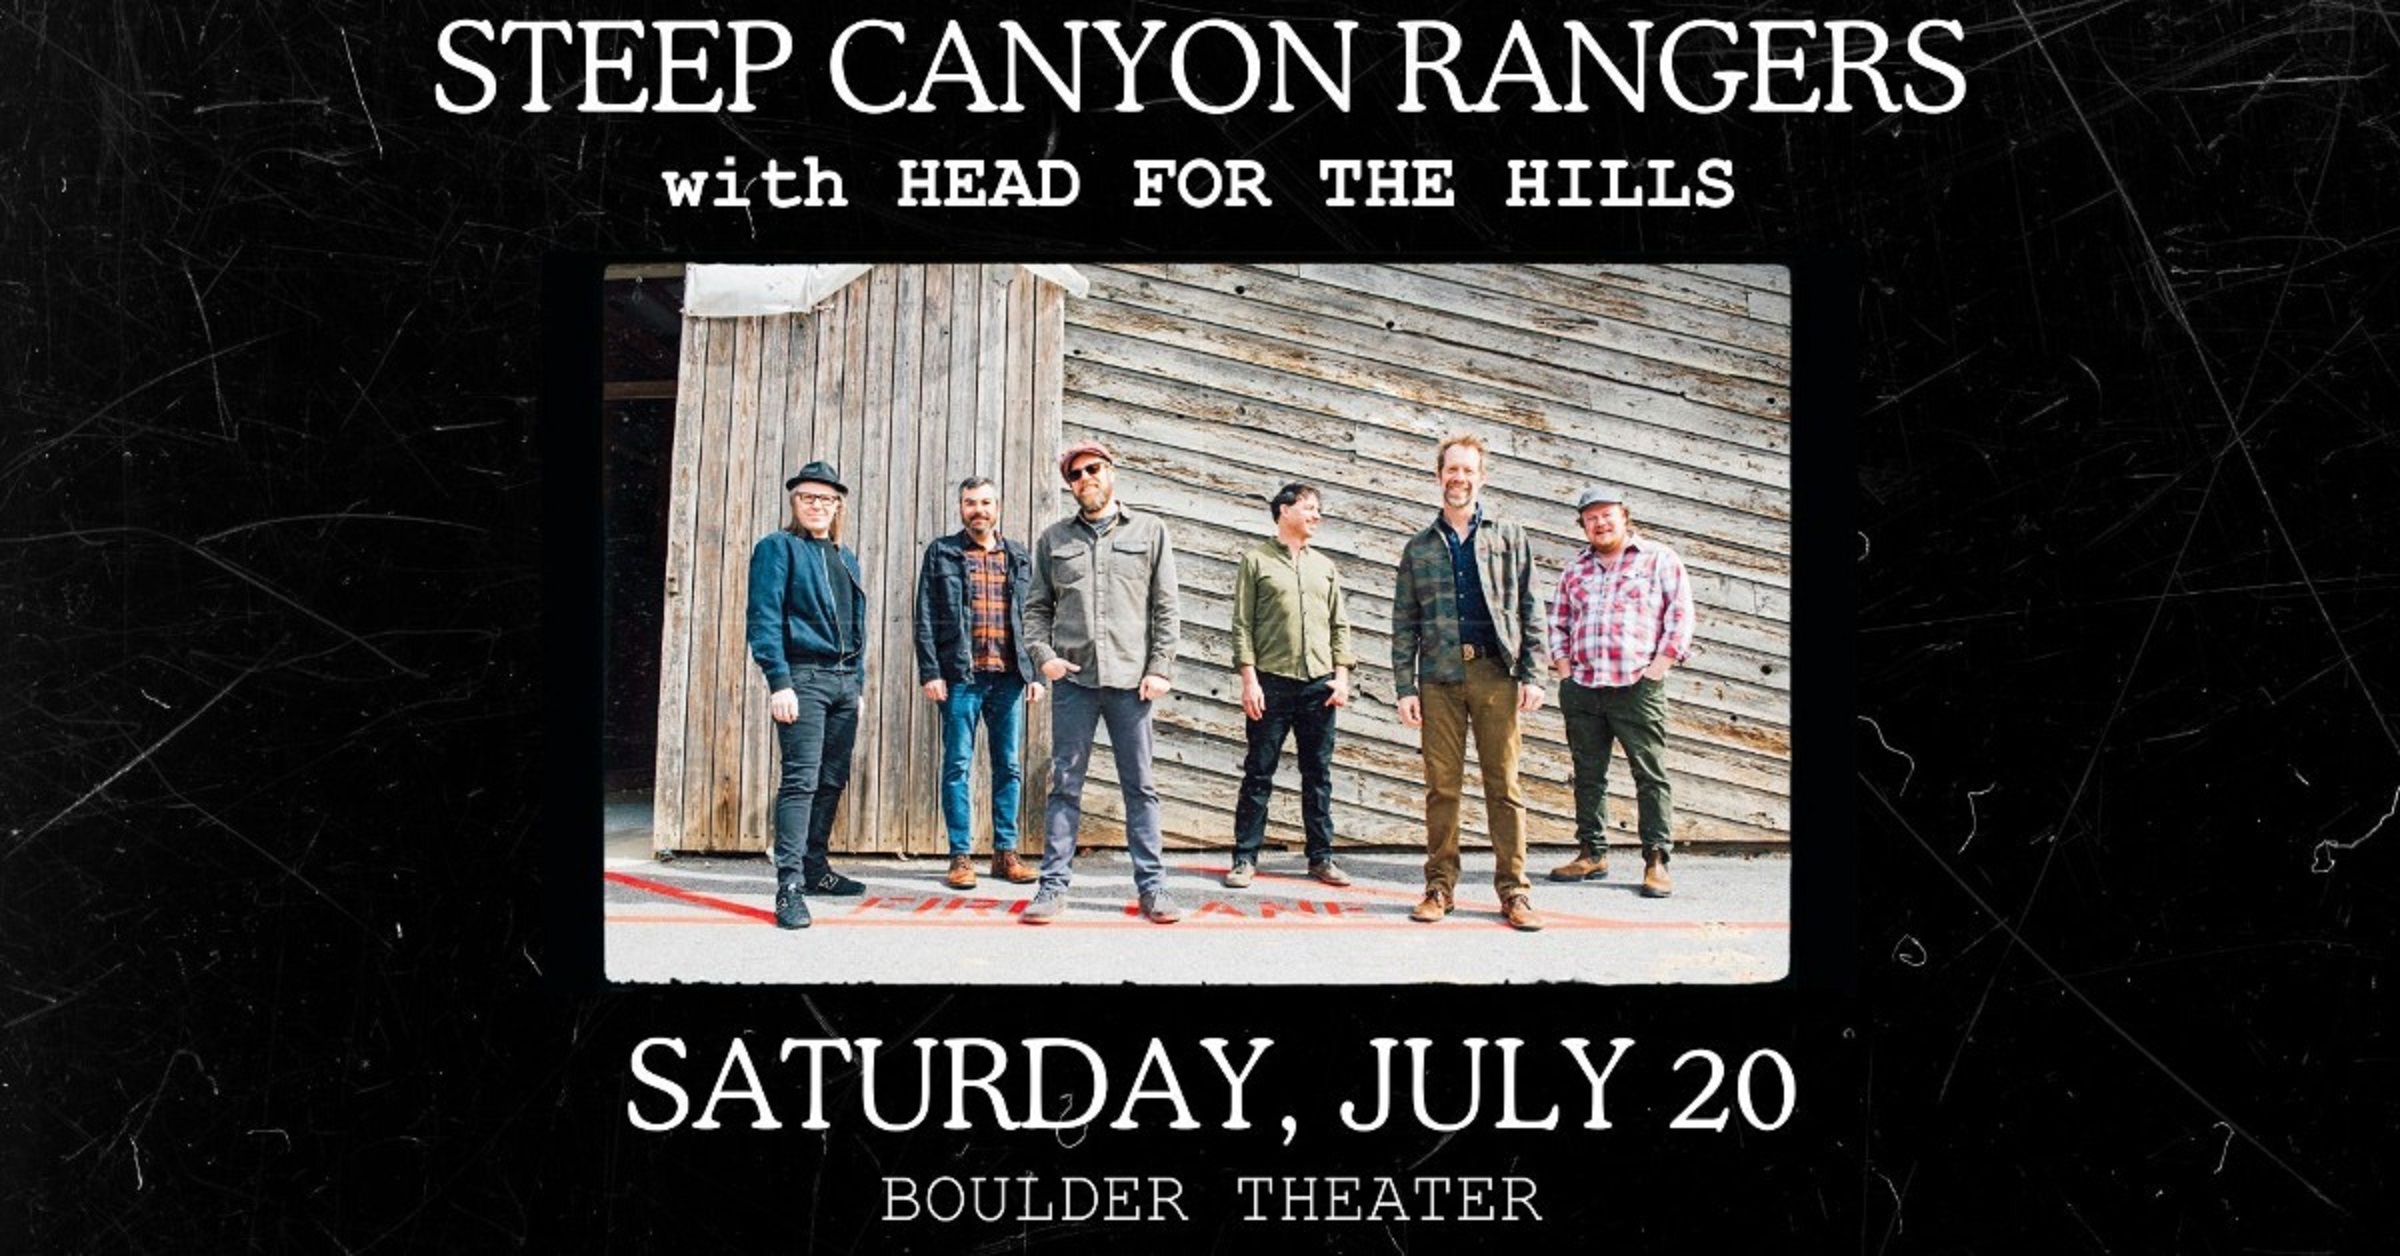 Boulder Theater Presents Steep Canyon Rangers with Head for the Hills - A Night of Unforgettable Bluegrass Music